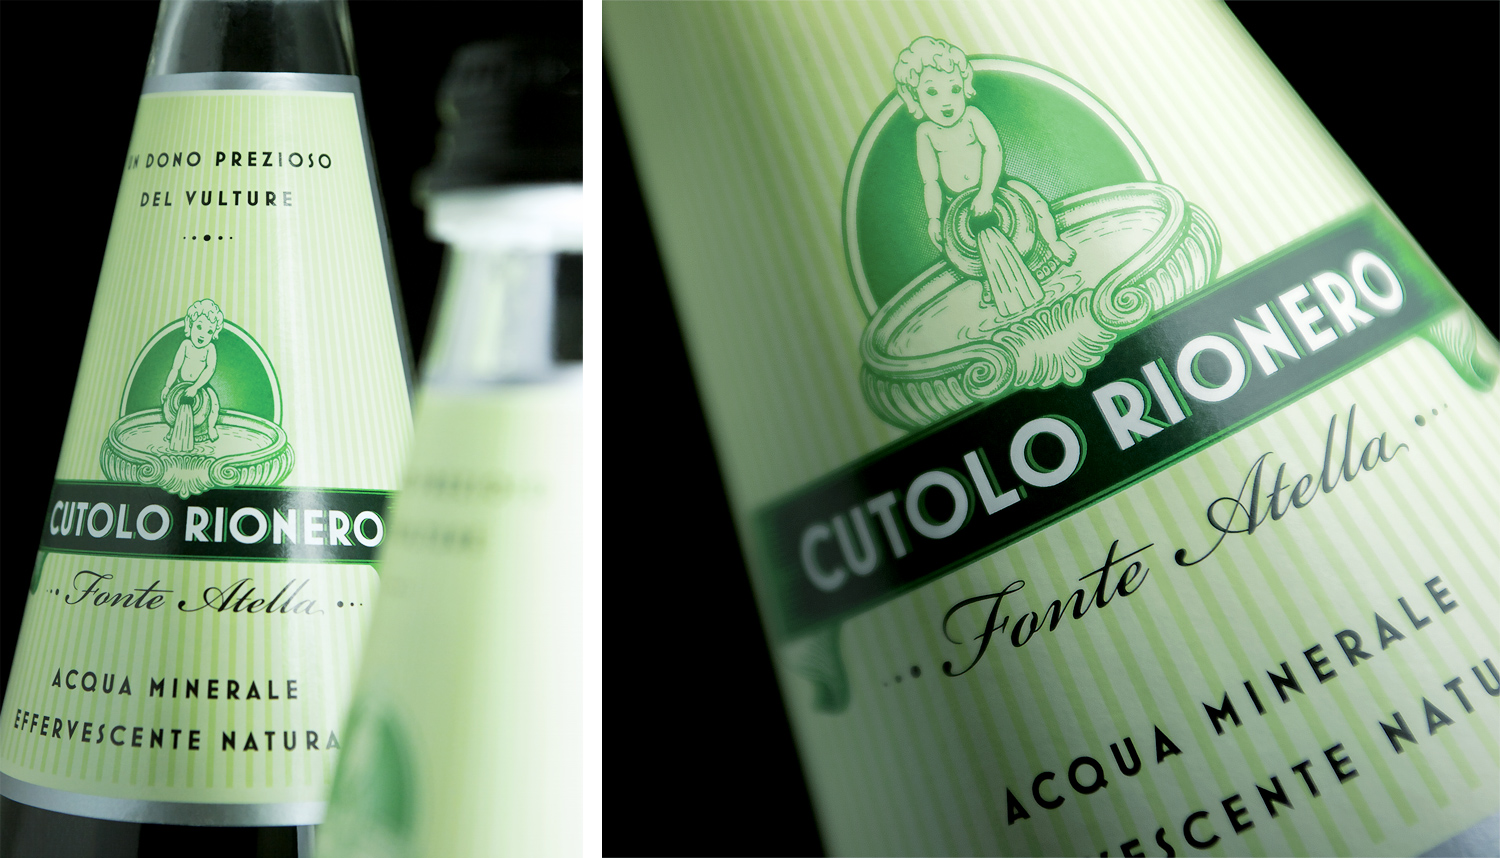 Cutolo Rionero Restyling Brand and Packaging System